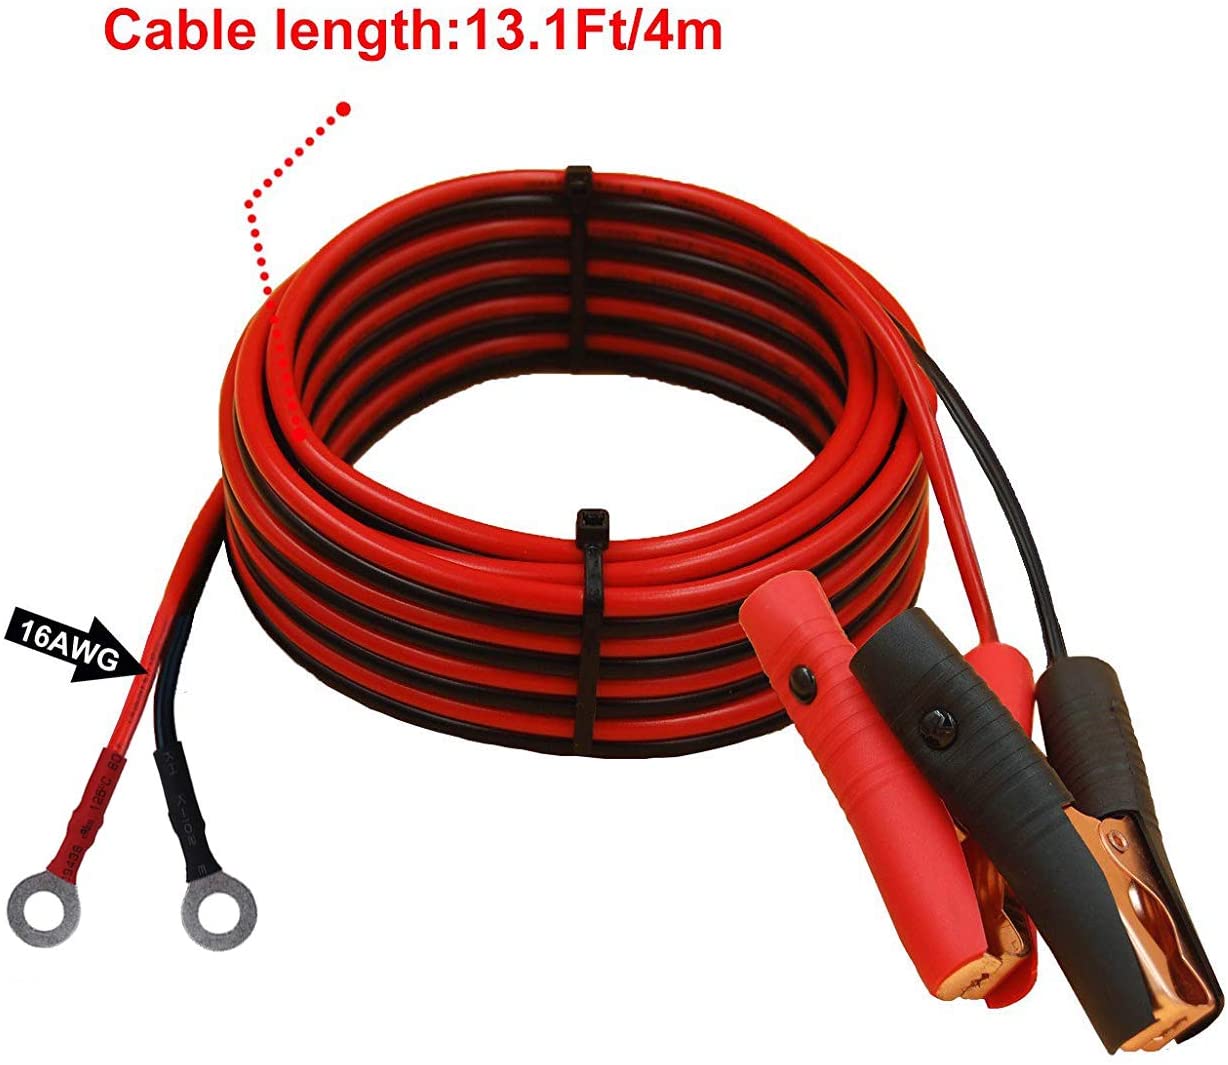 CUZEC 13.1FT/4m 16 AWG Extension Cord Eyelet Terminal with Battery Clamp 12V/ 24V Battery Clip-On for High-Power Inverter and More (13.1FT Long) - (For 8 piece(s))